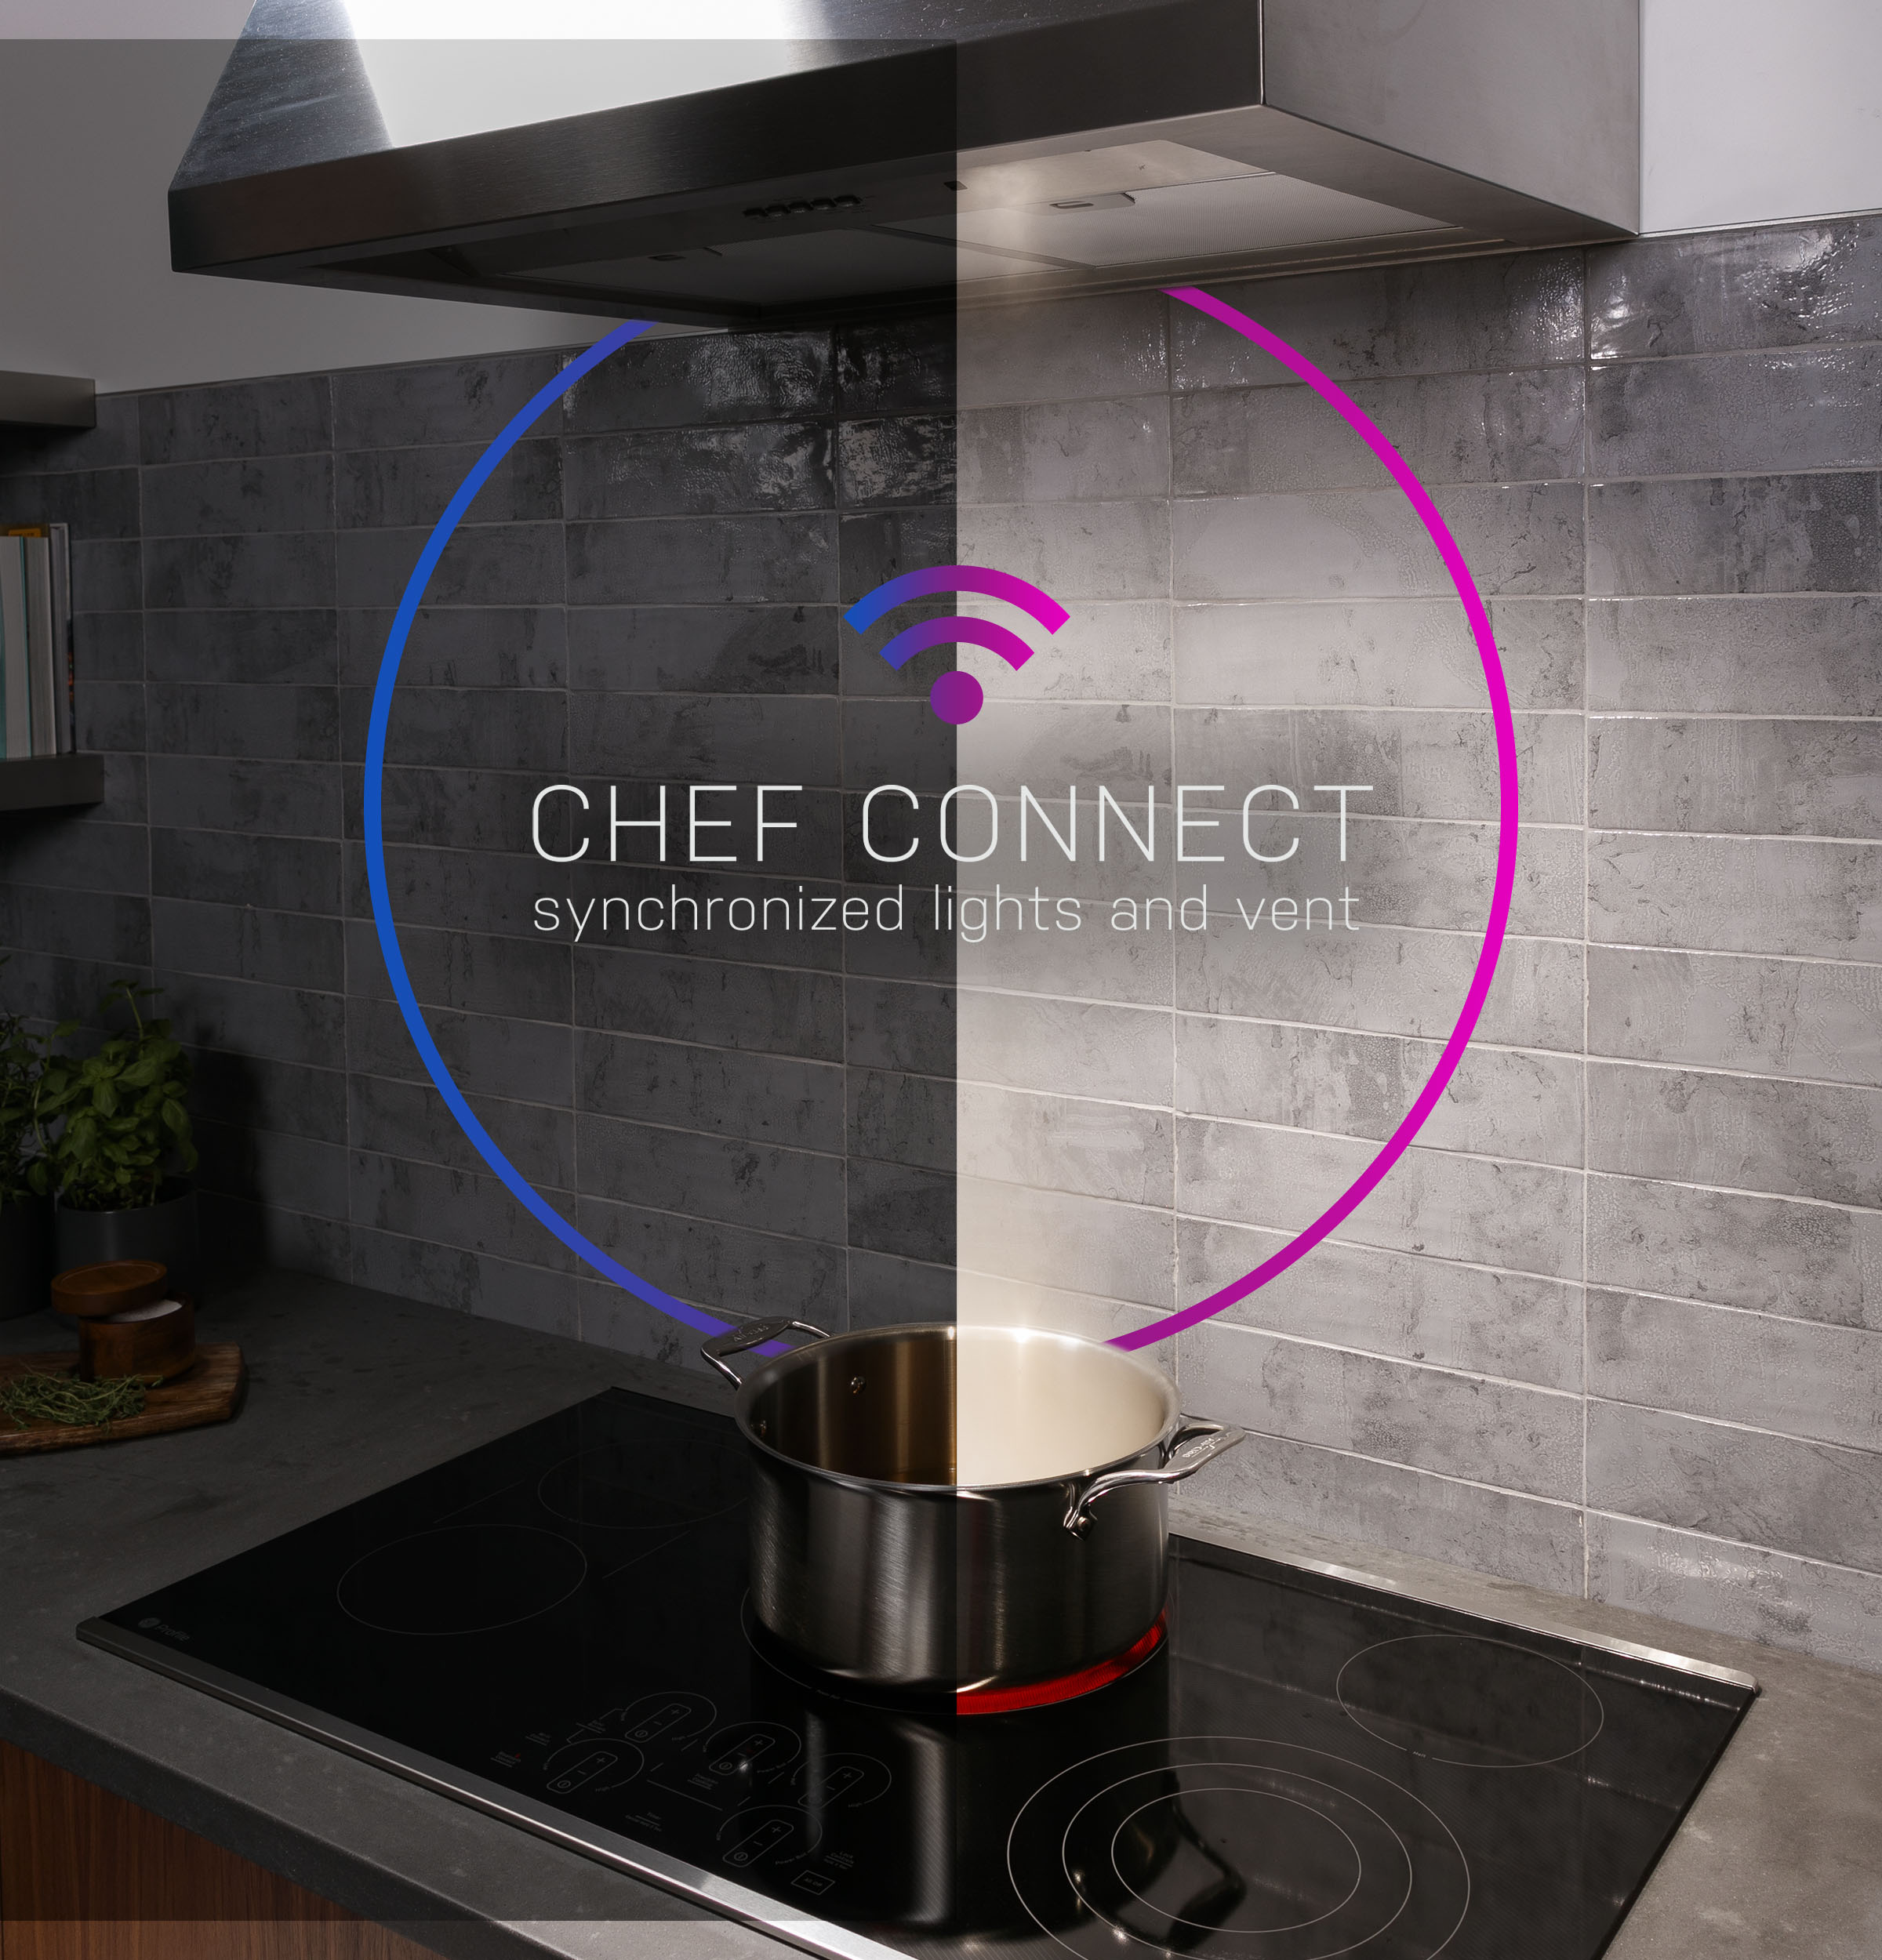 97007_Profile_Cooktop_Synchronized_Lights_and_Vent_2_Static.jpg